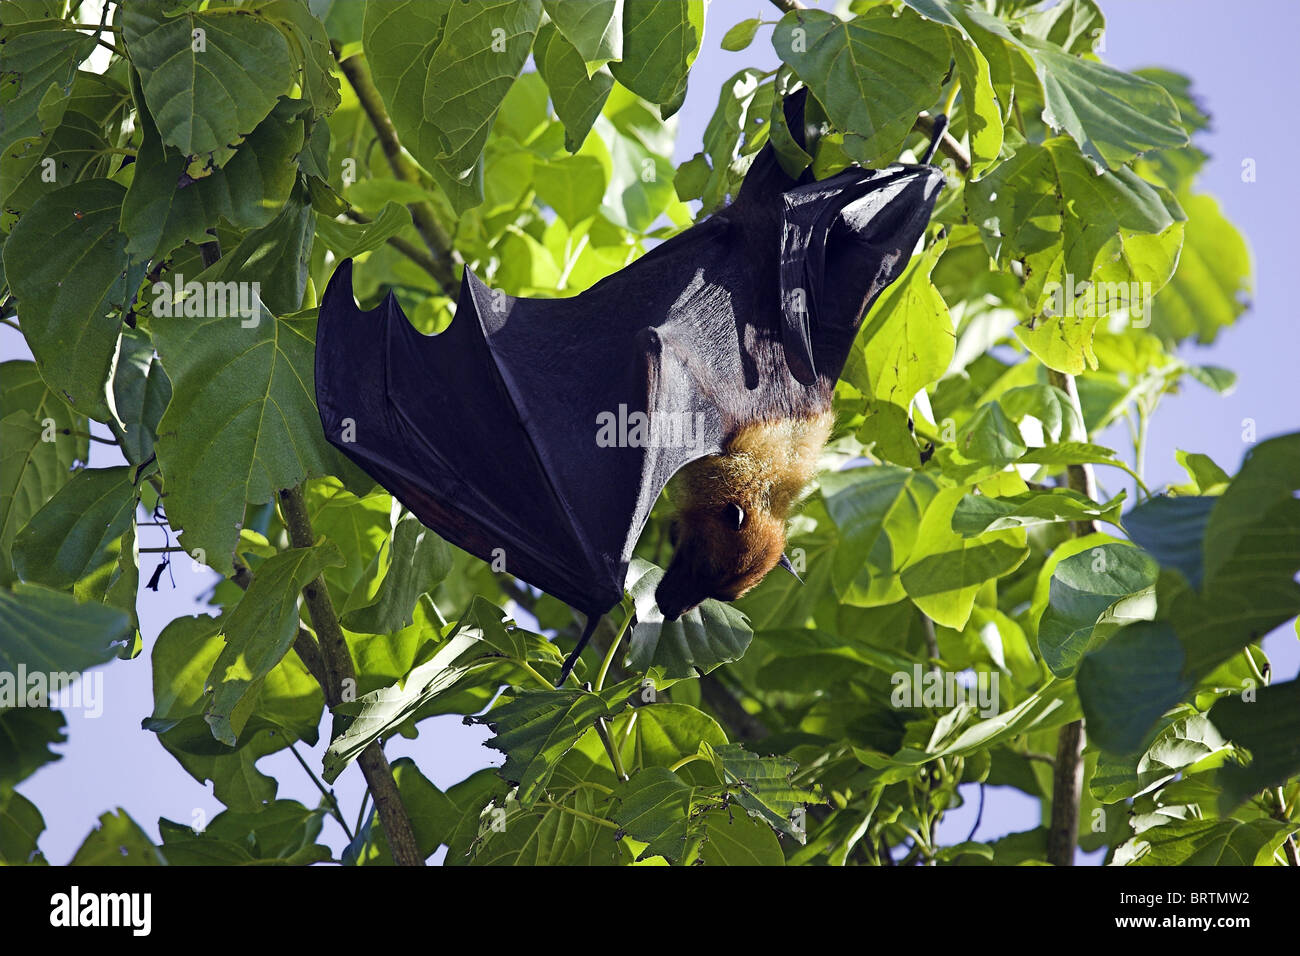 Fruit bat in a tree on an island in the maldives Stock Photo